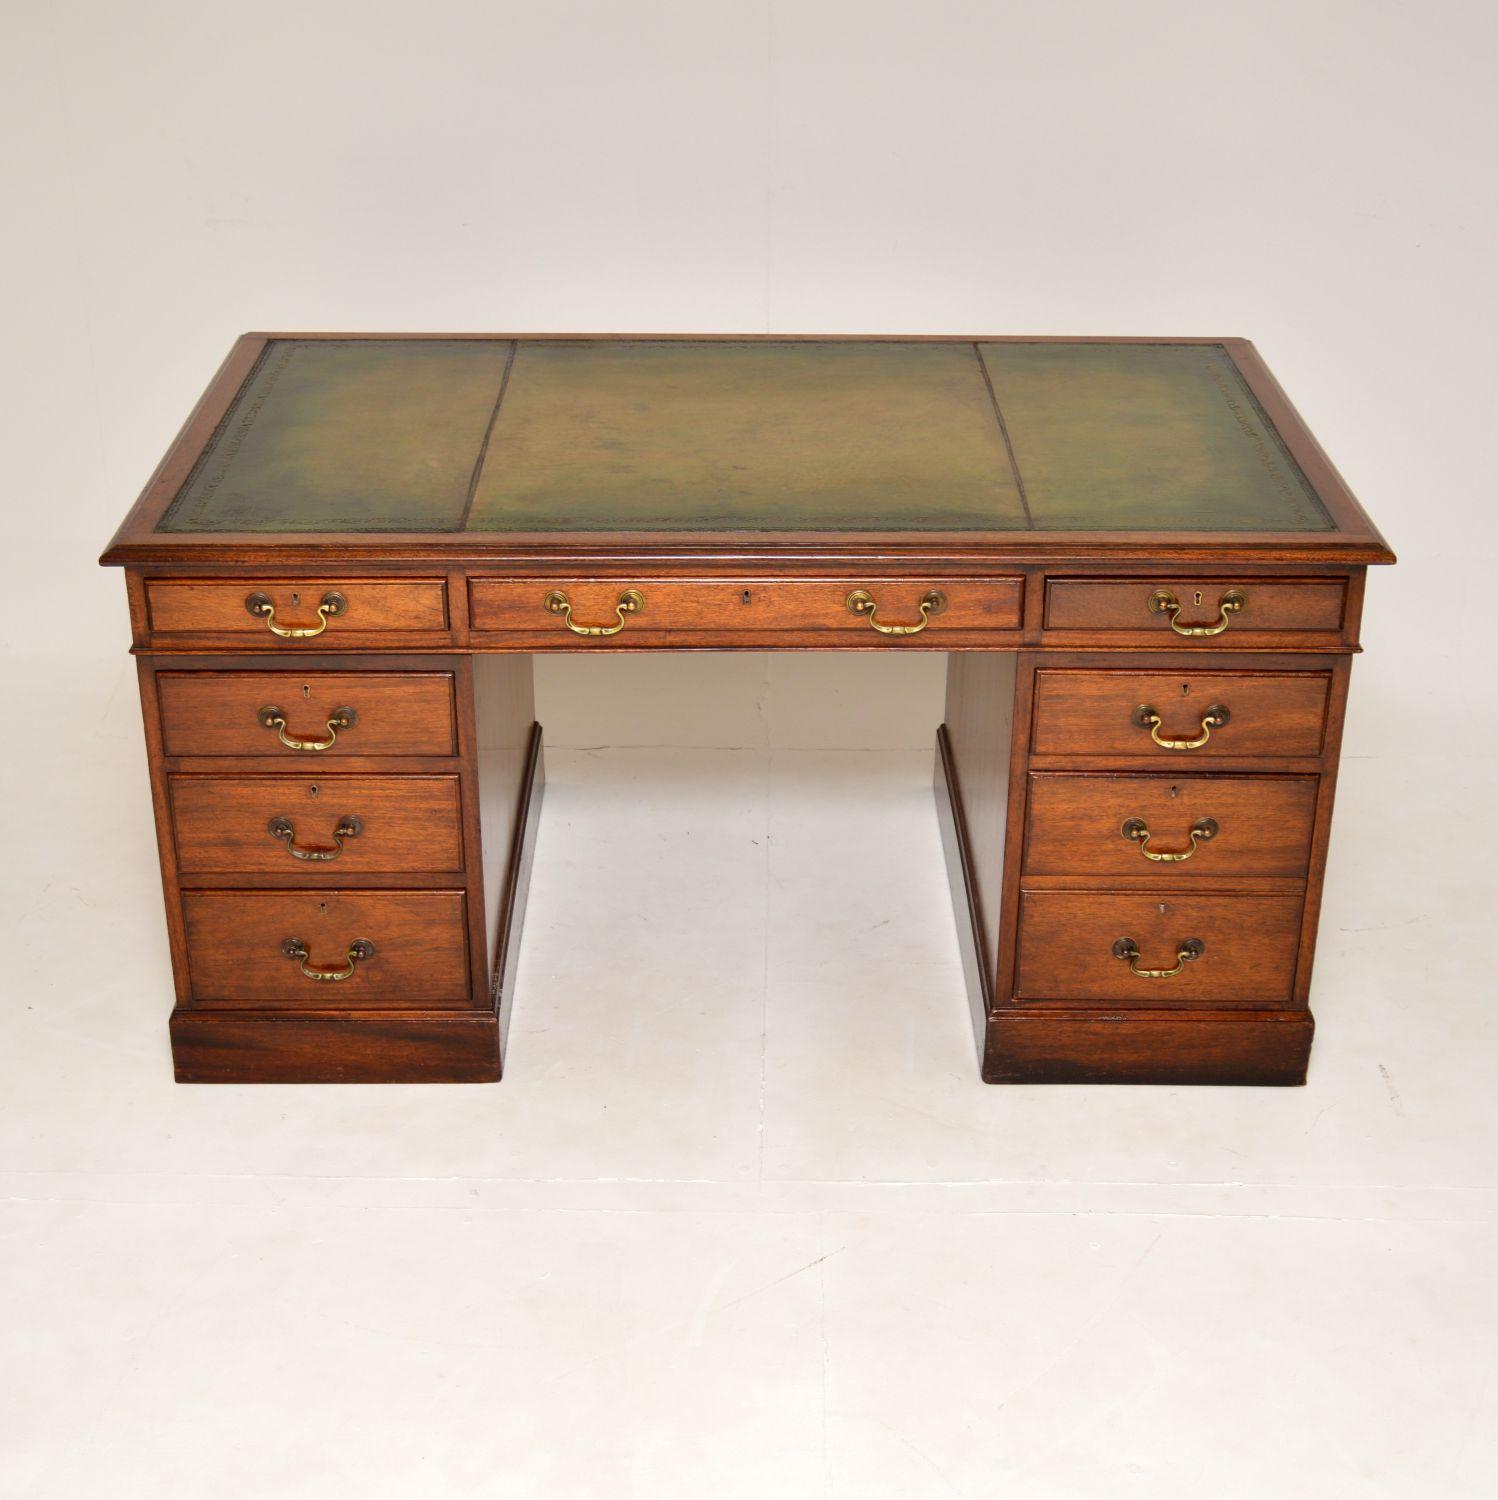 A large and very impressive antique wooden pedestal desk in the Georgian style. This was made in England & I would date it from around the 1930’s period.

This is of super quality and is a great size. The inset leather top has been revived, hand